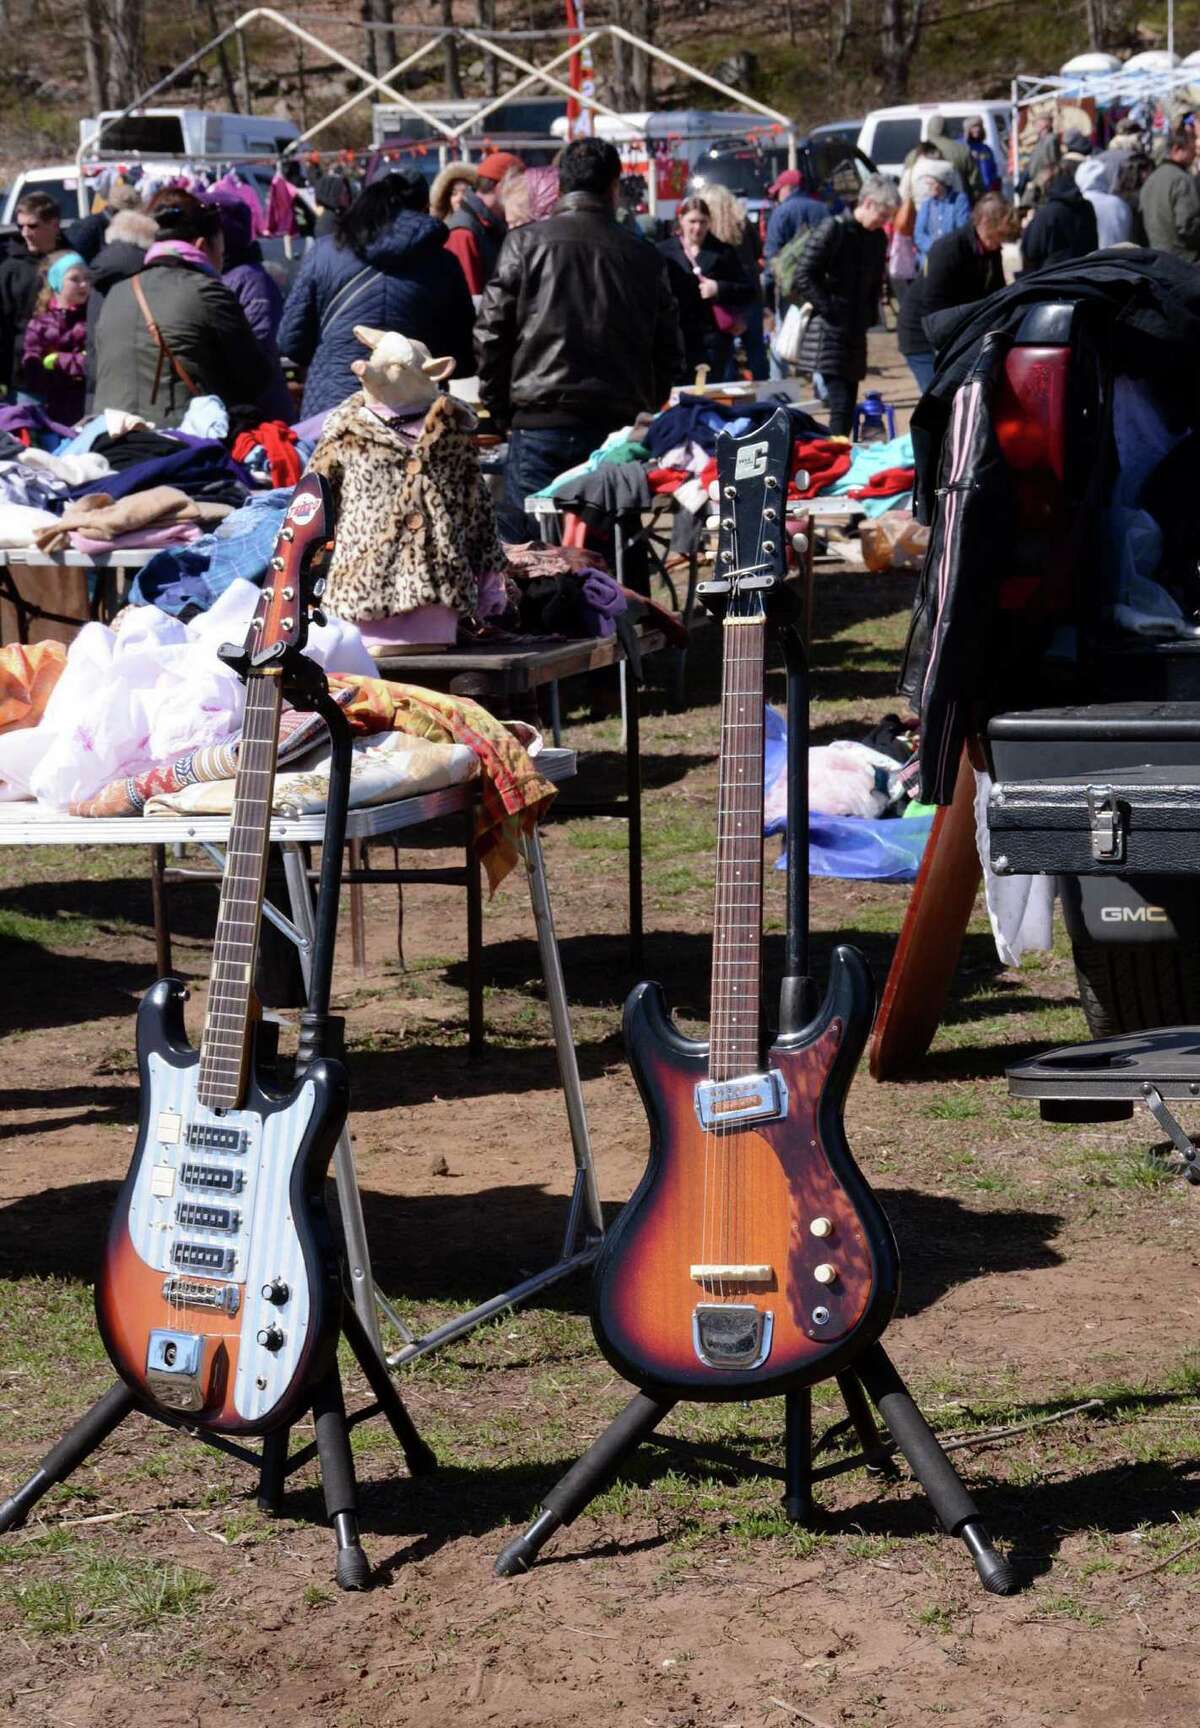 Elephant's Trunk Flea Market in New Milford opens for the season on Easter